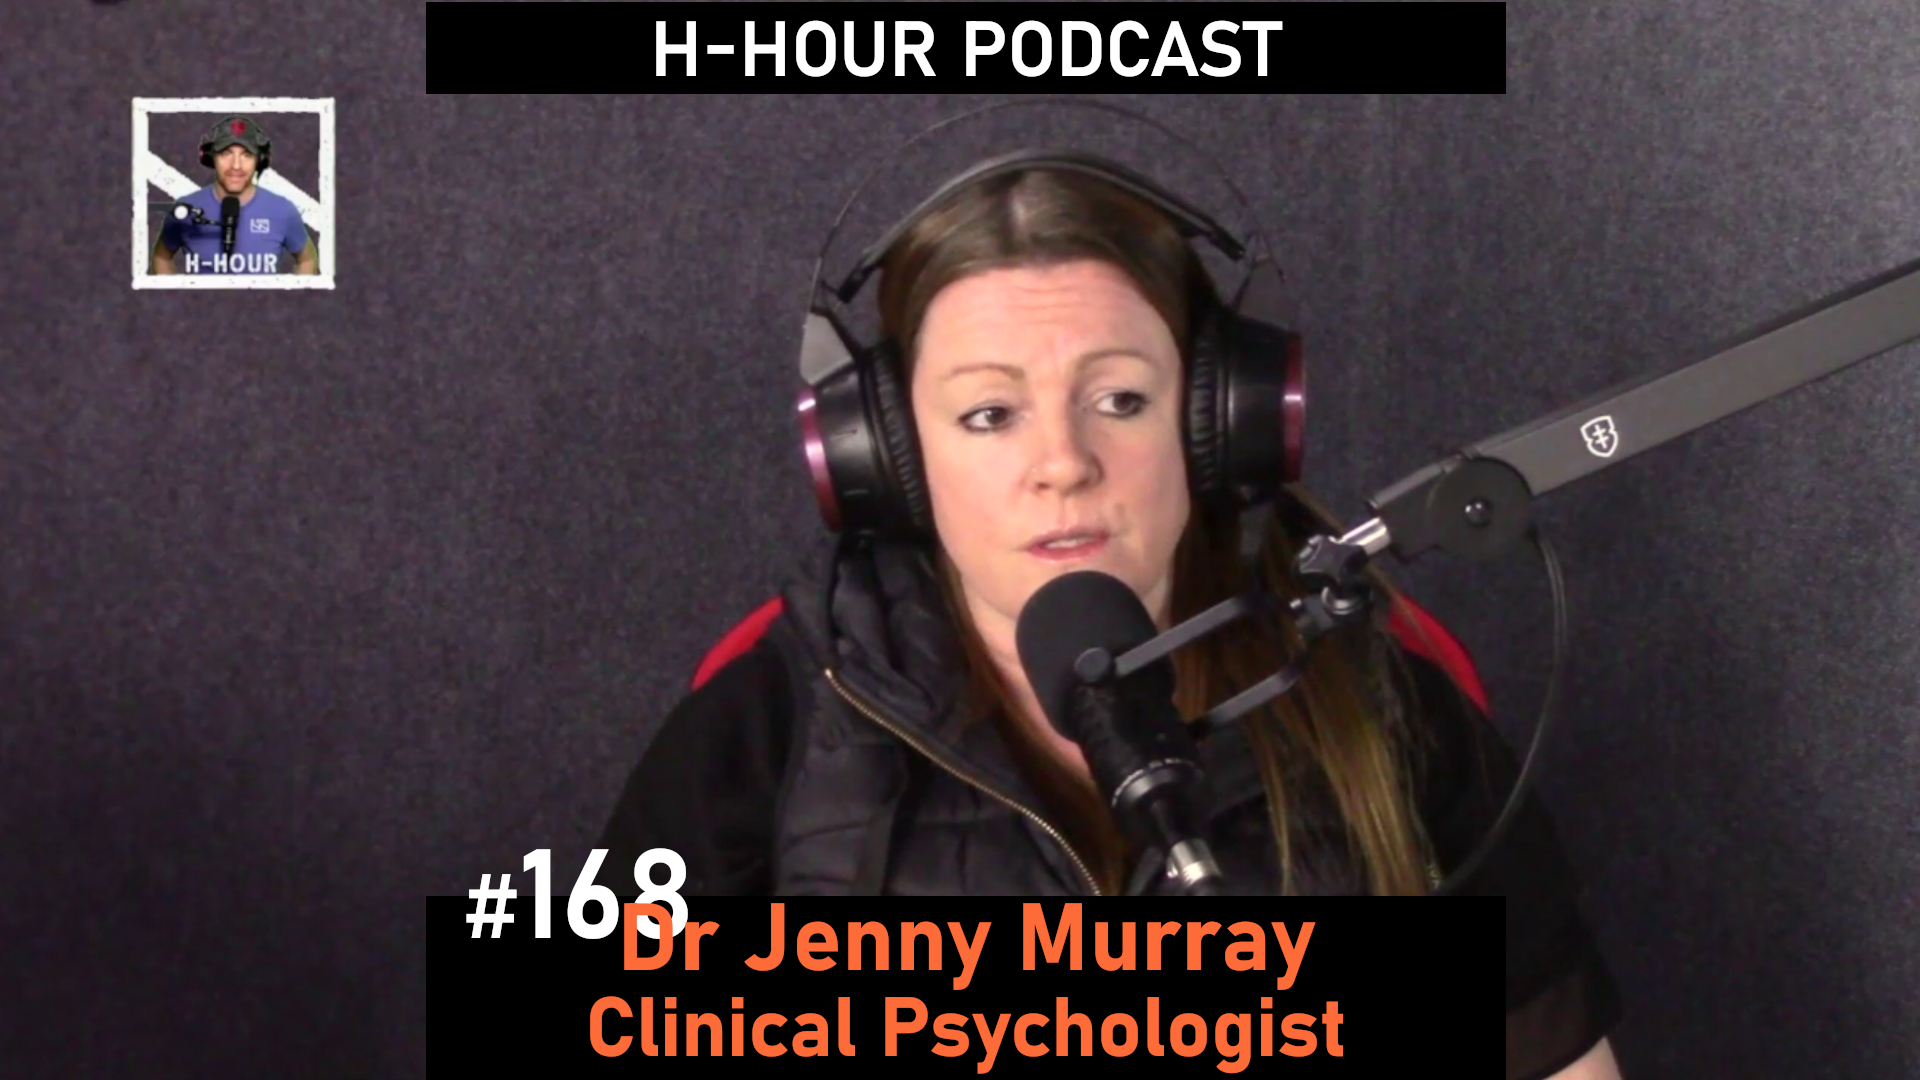 168 jenny murray doctor h-hour podcast interview berkshire psychology Podcast cover image